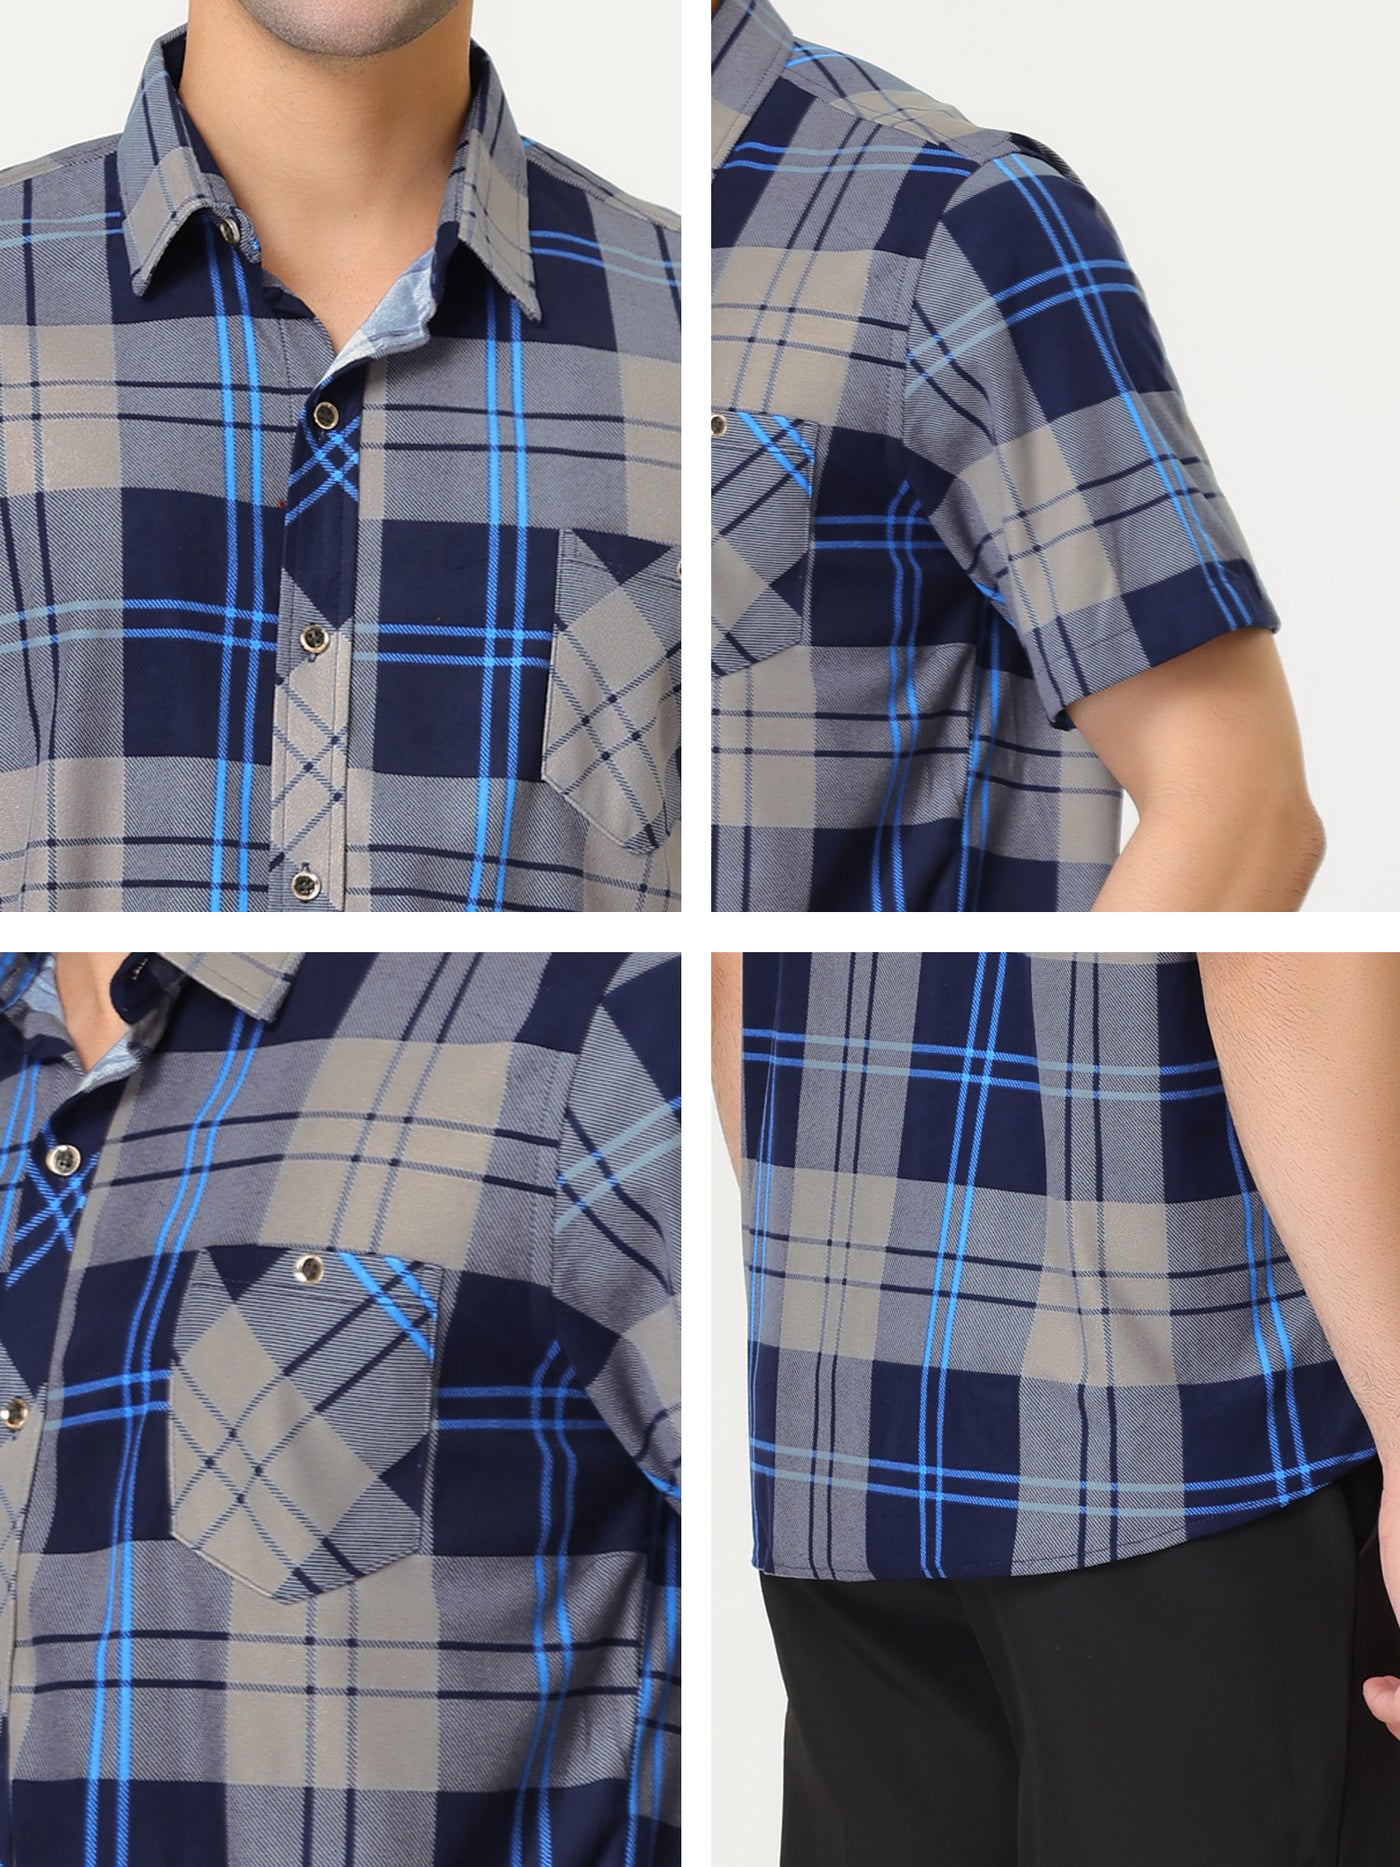 Bublédon Men's Plaid Shirt Short Sleeves Casual Contrast Color Button Down Checked Shirts